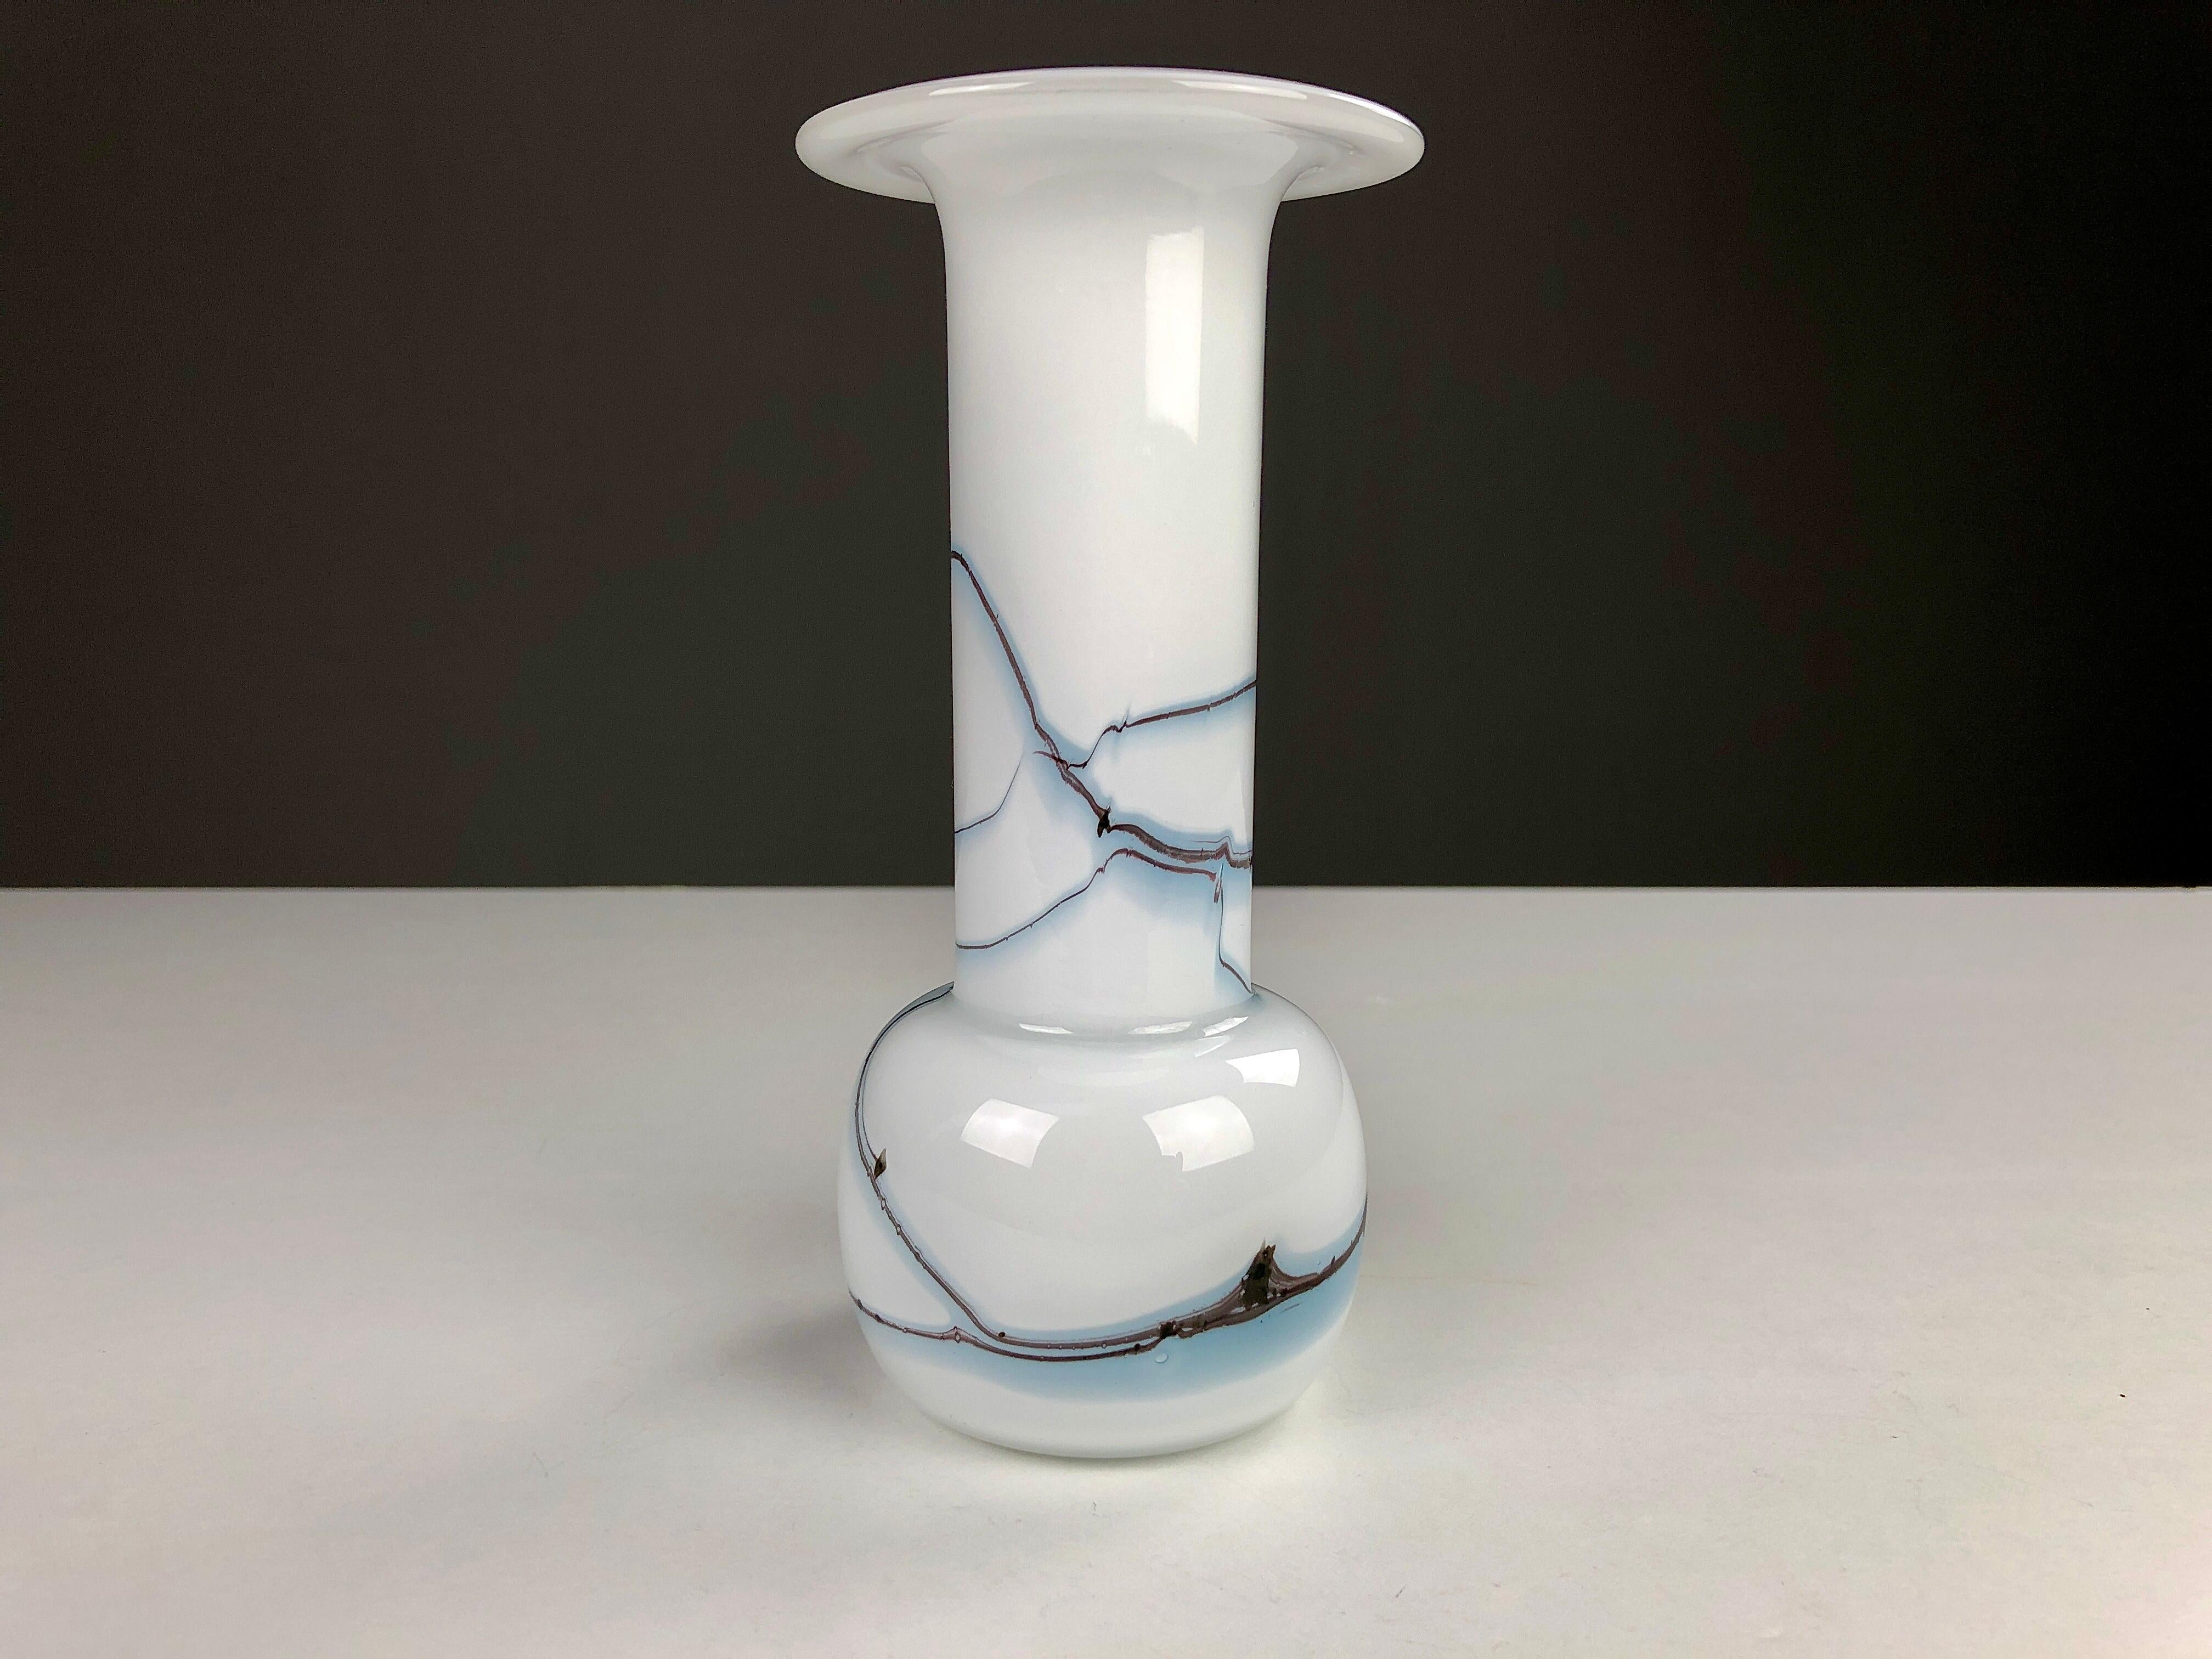 Danish Vase / candle holder in white, black and blue art glass by Michael Bang produced by Holmegaard in the 1980s.

Michael Bang (1942-2013) was the son of Jacob E. Bang, Holmegaard’s first designer. In the 1960s - 1980´s, Michael Bang was a